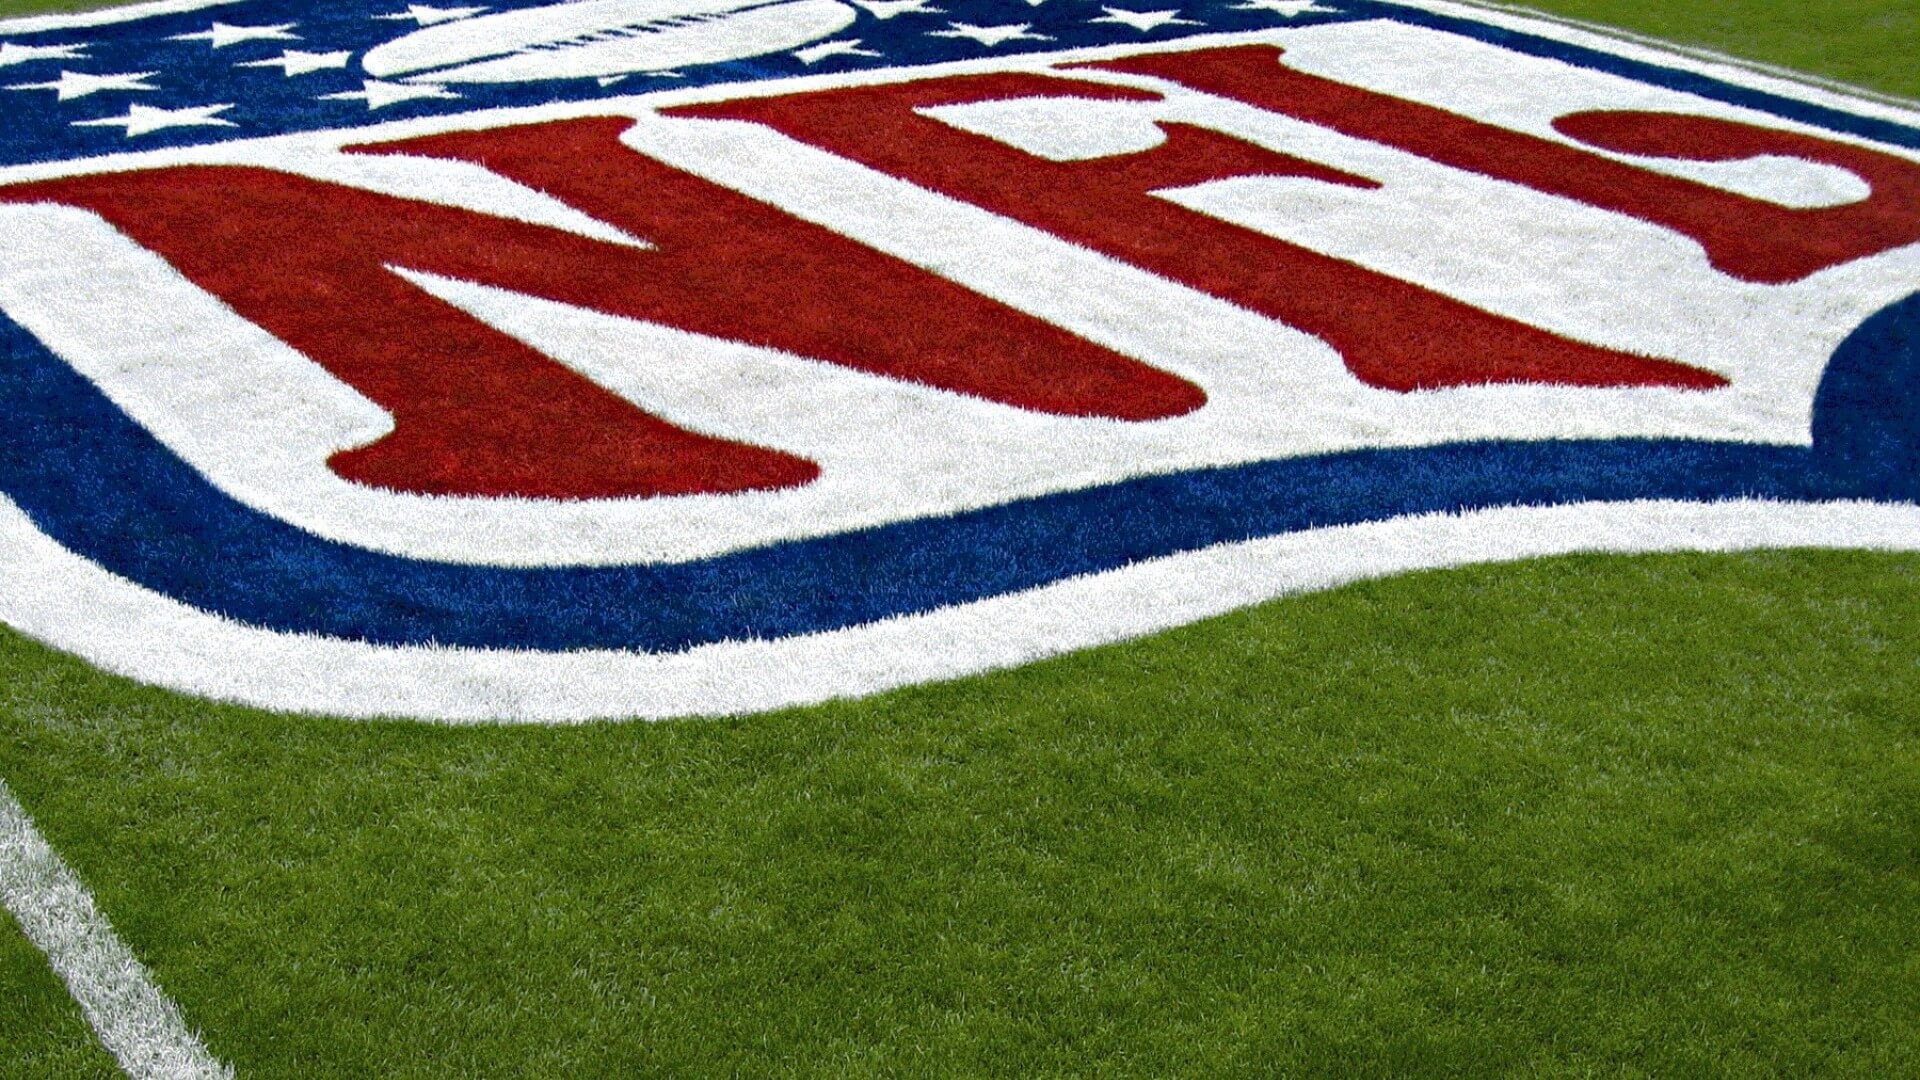 NFL Logo Wallpaper With high-resolution 1920X1080 pixel. You can use this wallpaper for your Mac or Windows Desktop Background, iPhone, Android or Tablet and another Smartphone device